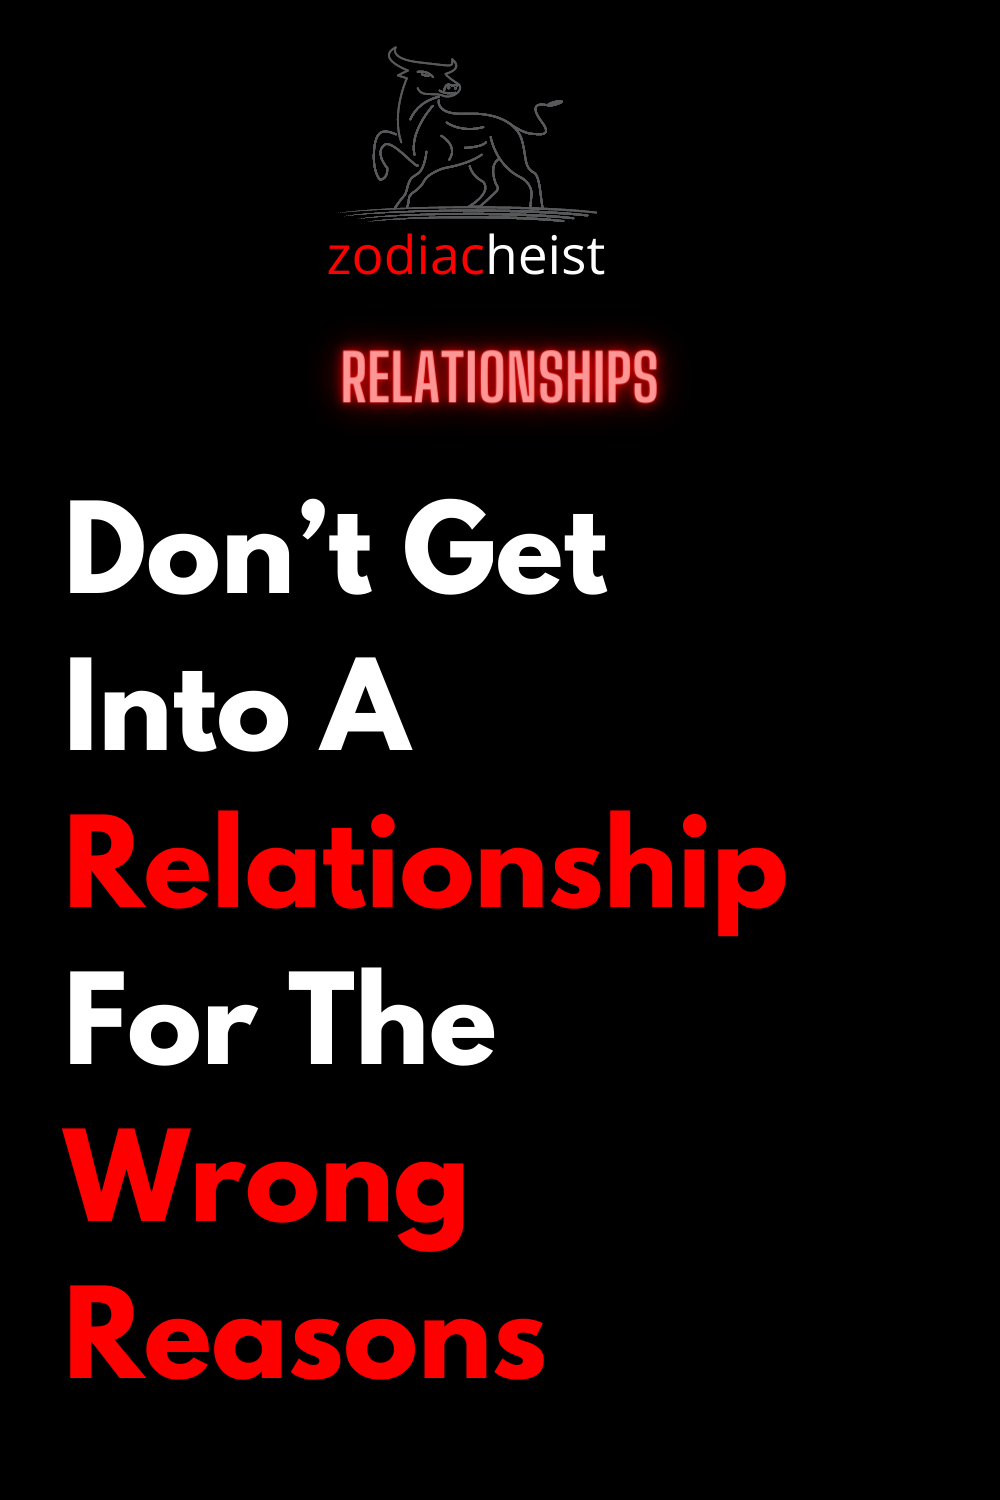 Don’t Get Into A Relationship For The Wrong Reasons